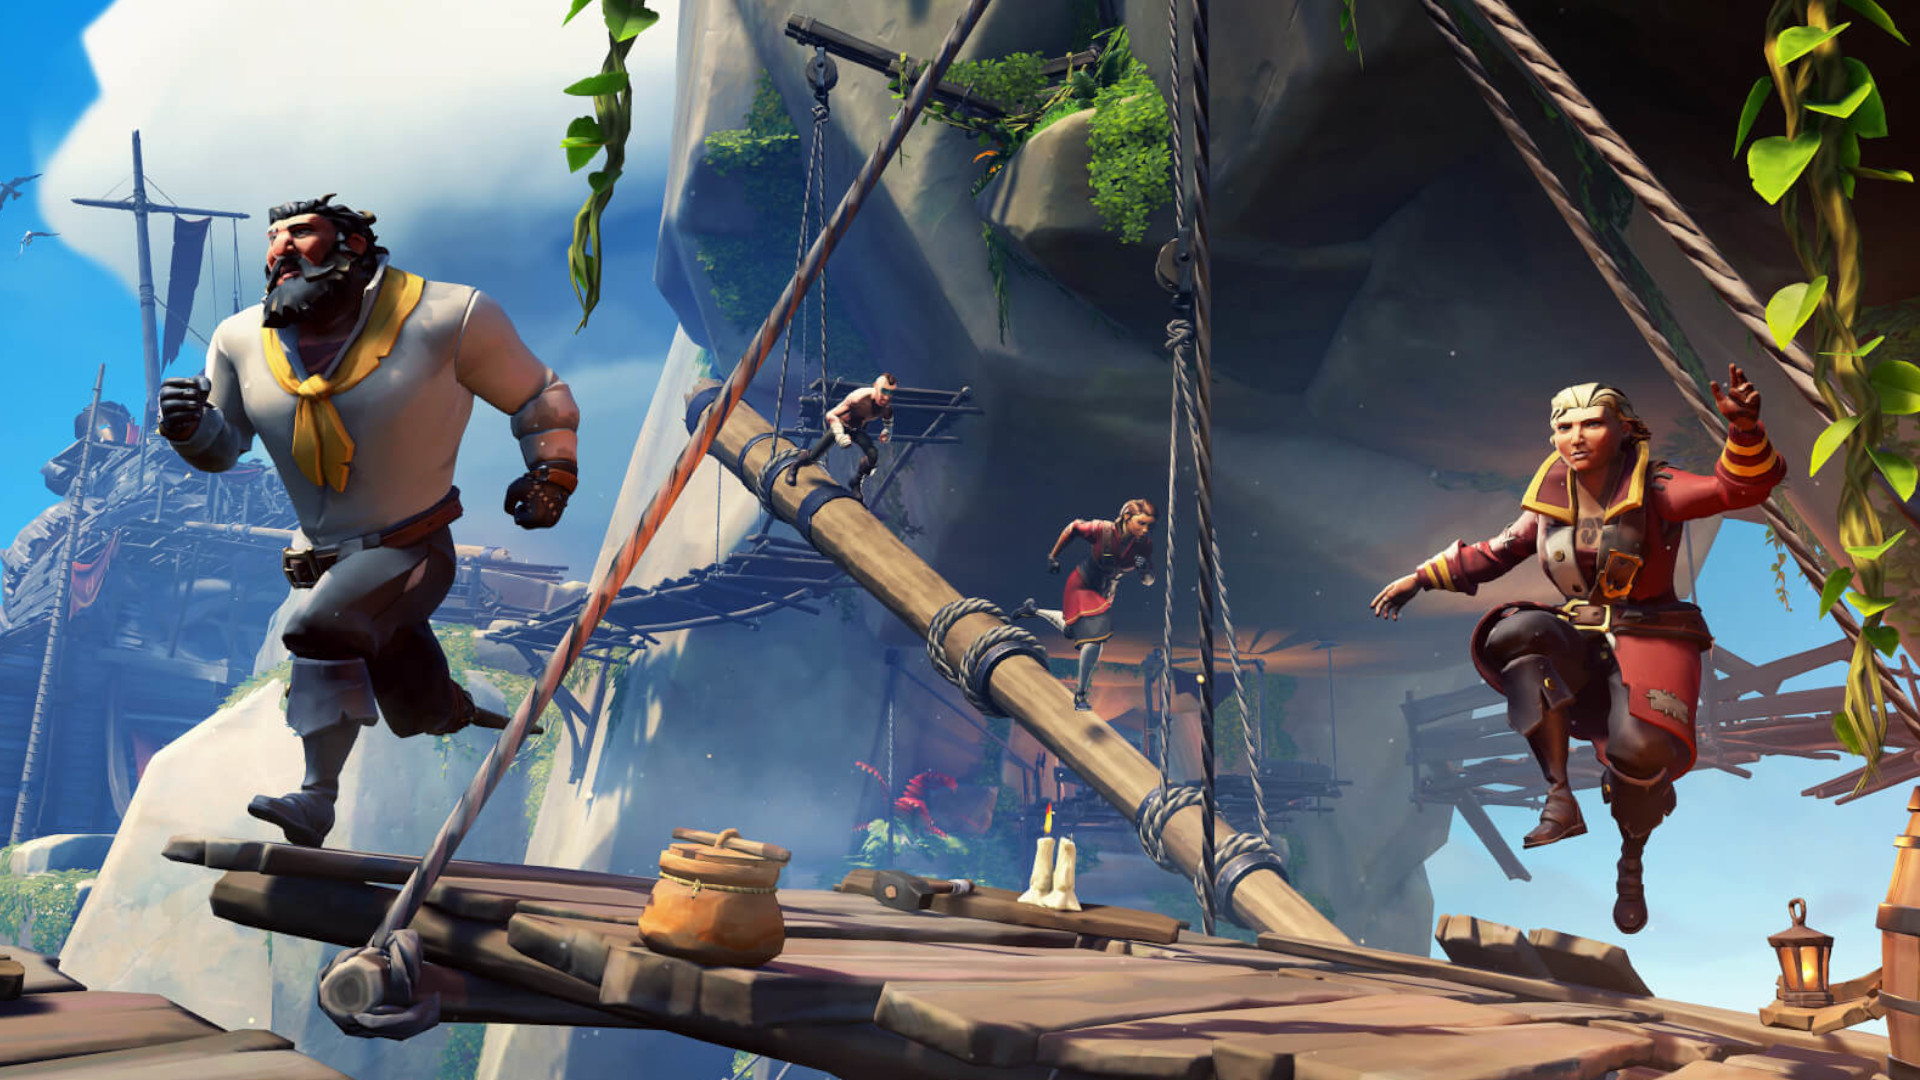 Sea of Thieves battle pass explained – here’s what’s free and what you